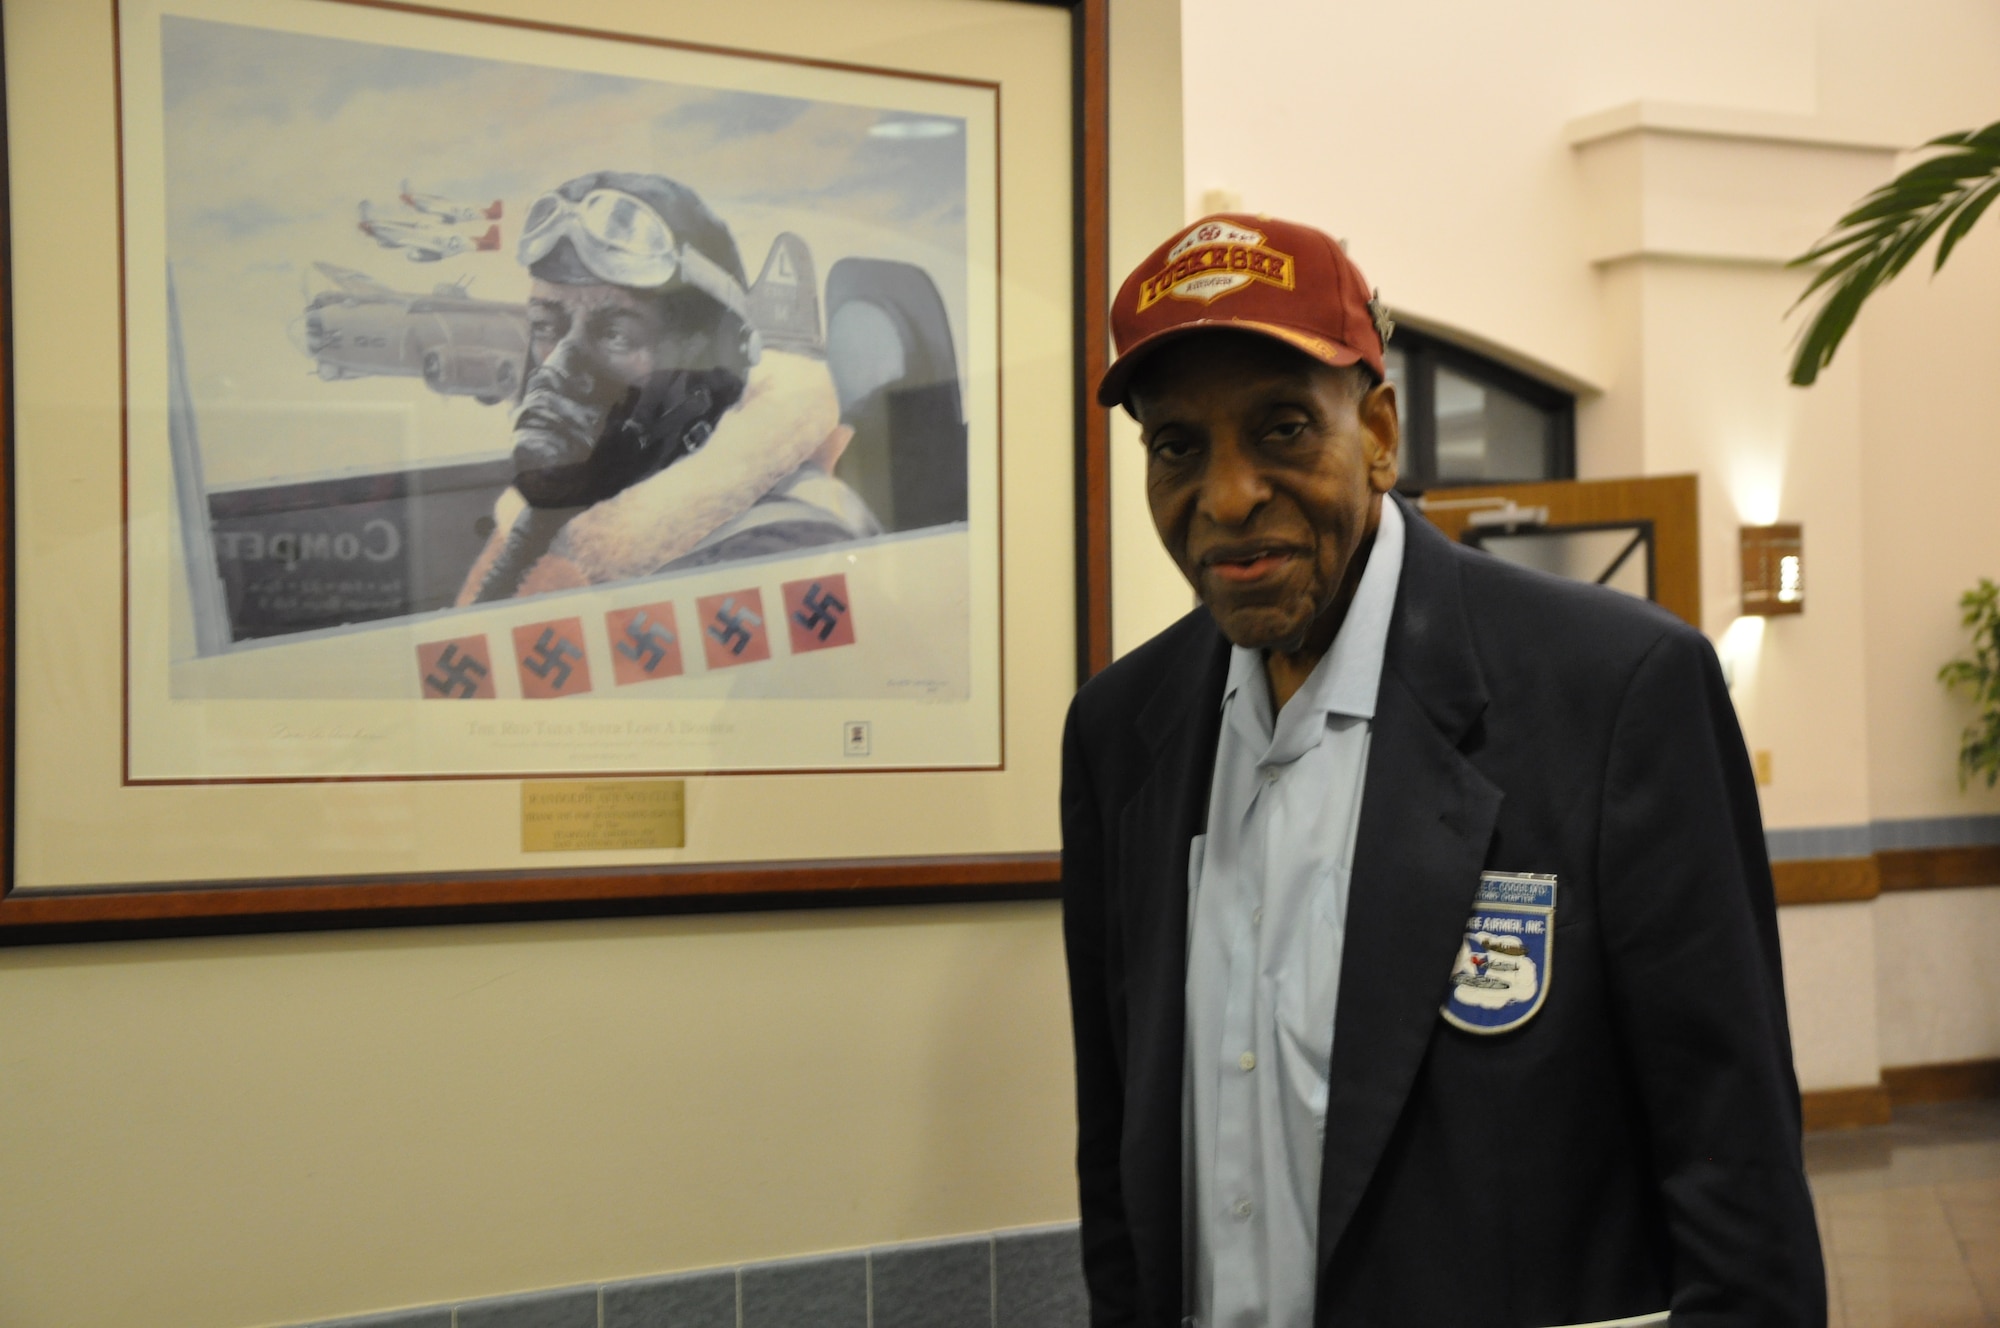 RANDOLPH AIR FORCE BASE, Texas – Dr. Granville Coggs, a documented original Tuskegee Airman, made history when he signed up to be a member of the Army Air Corps. He answered the national call as an aerial gunner, bombardier and pilot. (U.S. Air Force photo/ 1st Lt. Leanne Hedgepeth)